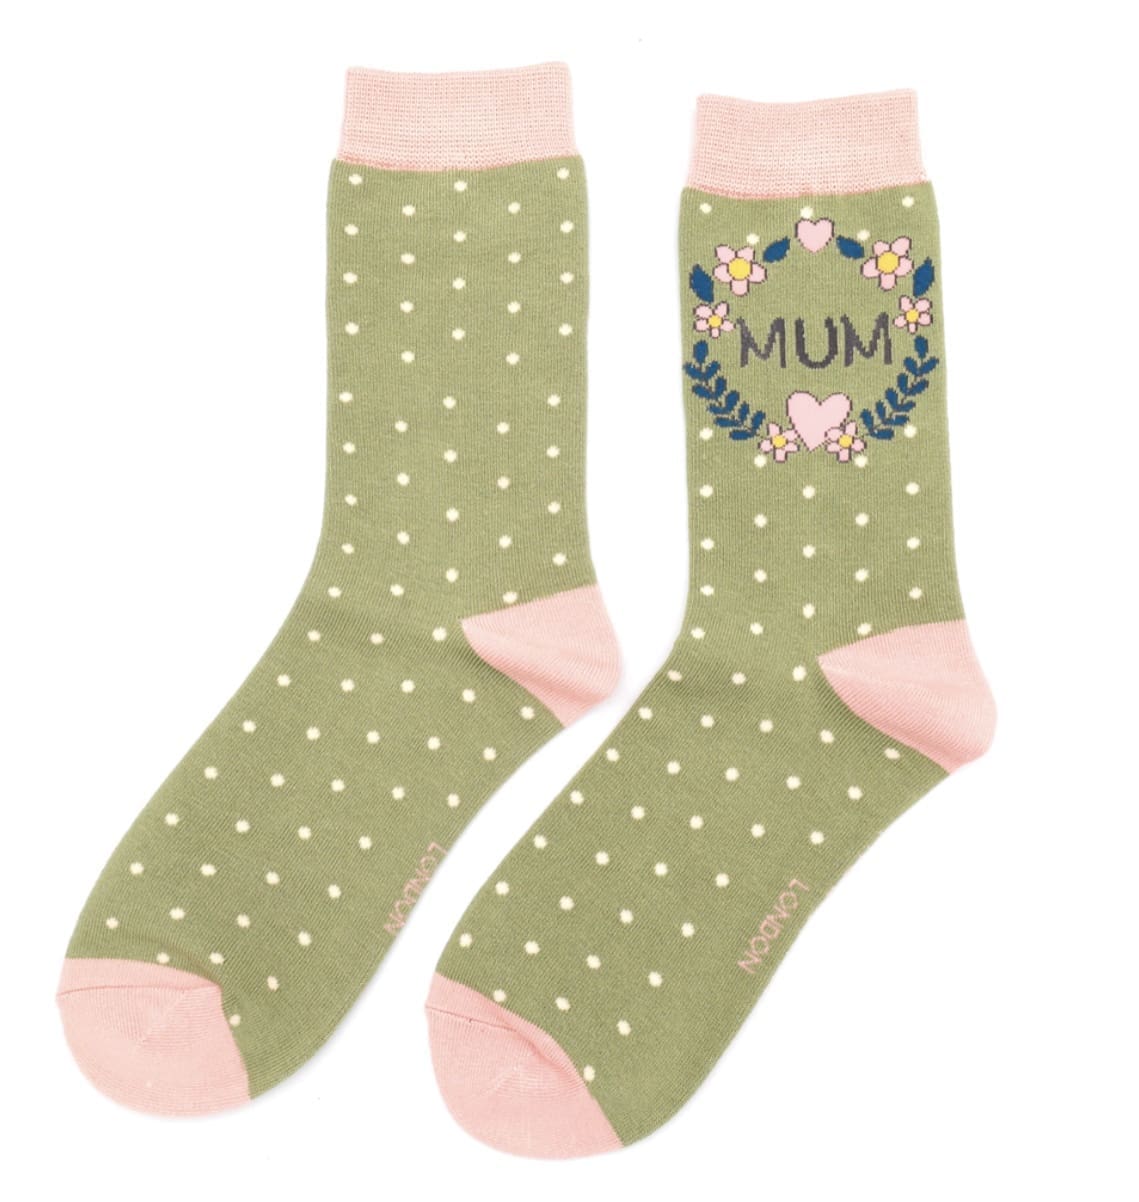 A pair of green and pink socks with the word mum on them.